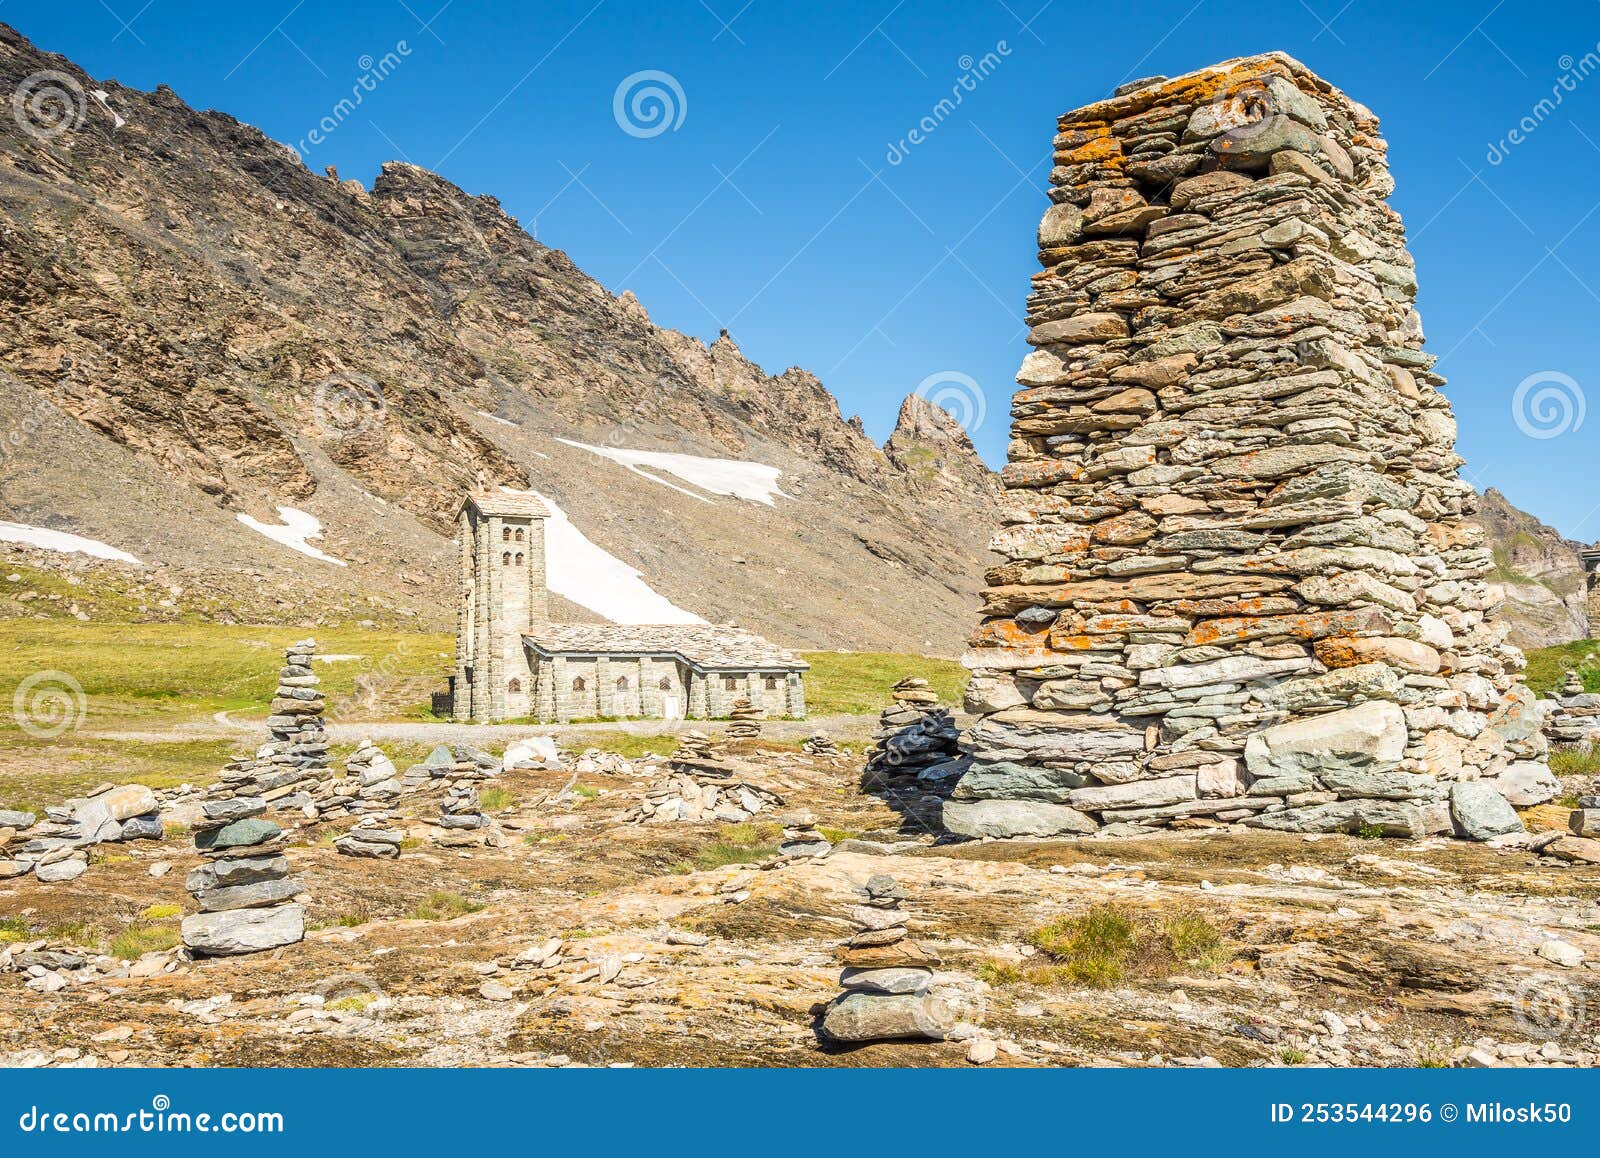 view at stone tower and church of our lady of all prudence at col de l iseran pass in savoie alps - france